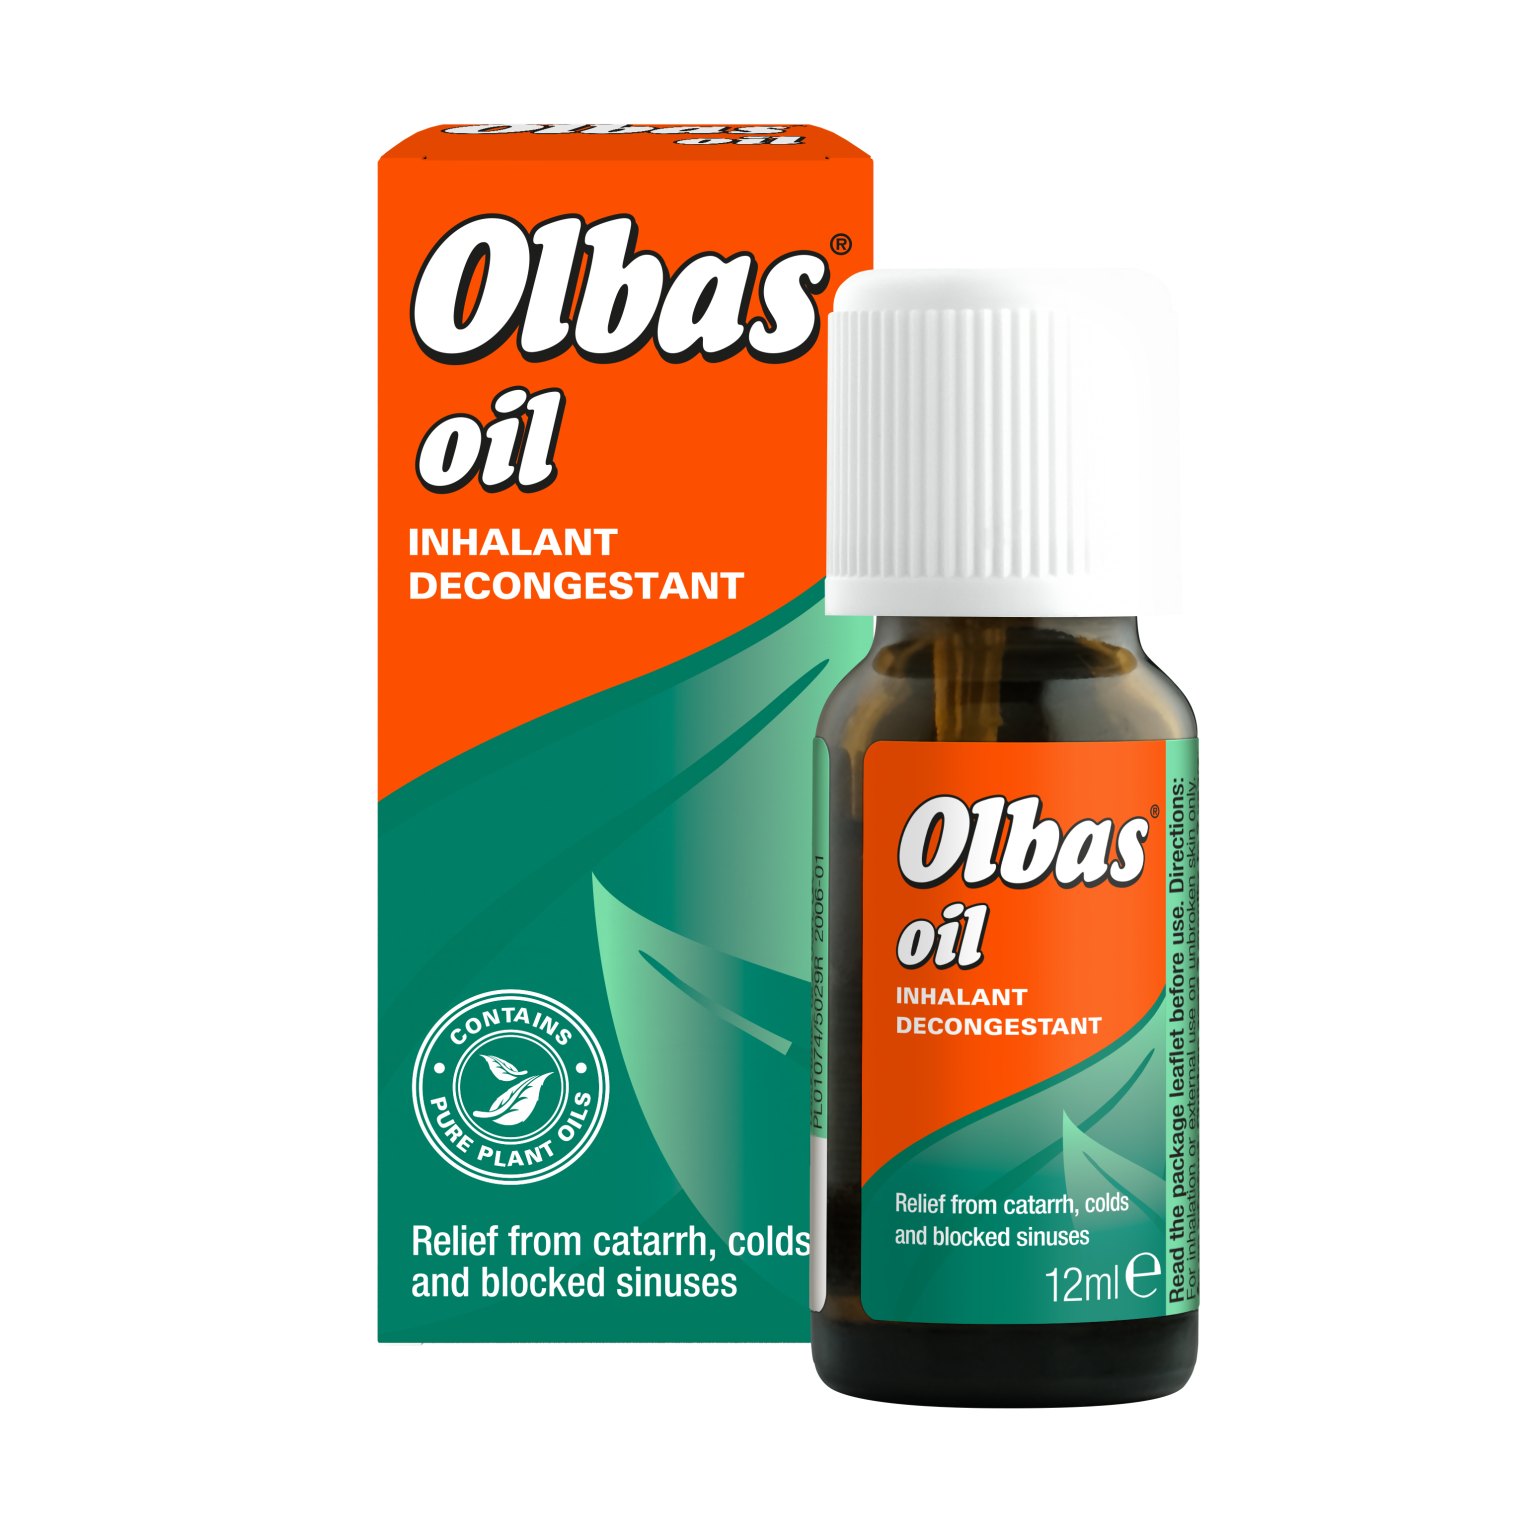 Olbas has been part of the Lane family for over 50 years and we're proud to have made it a household name in the UK and a firm favourite for families across the country. Always read the label.